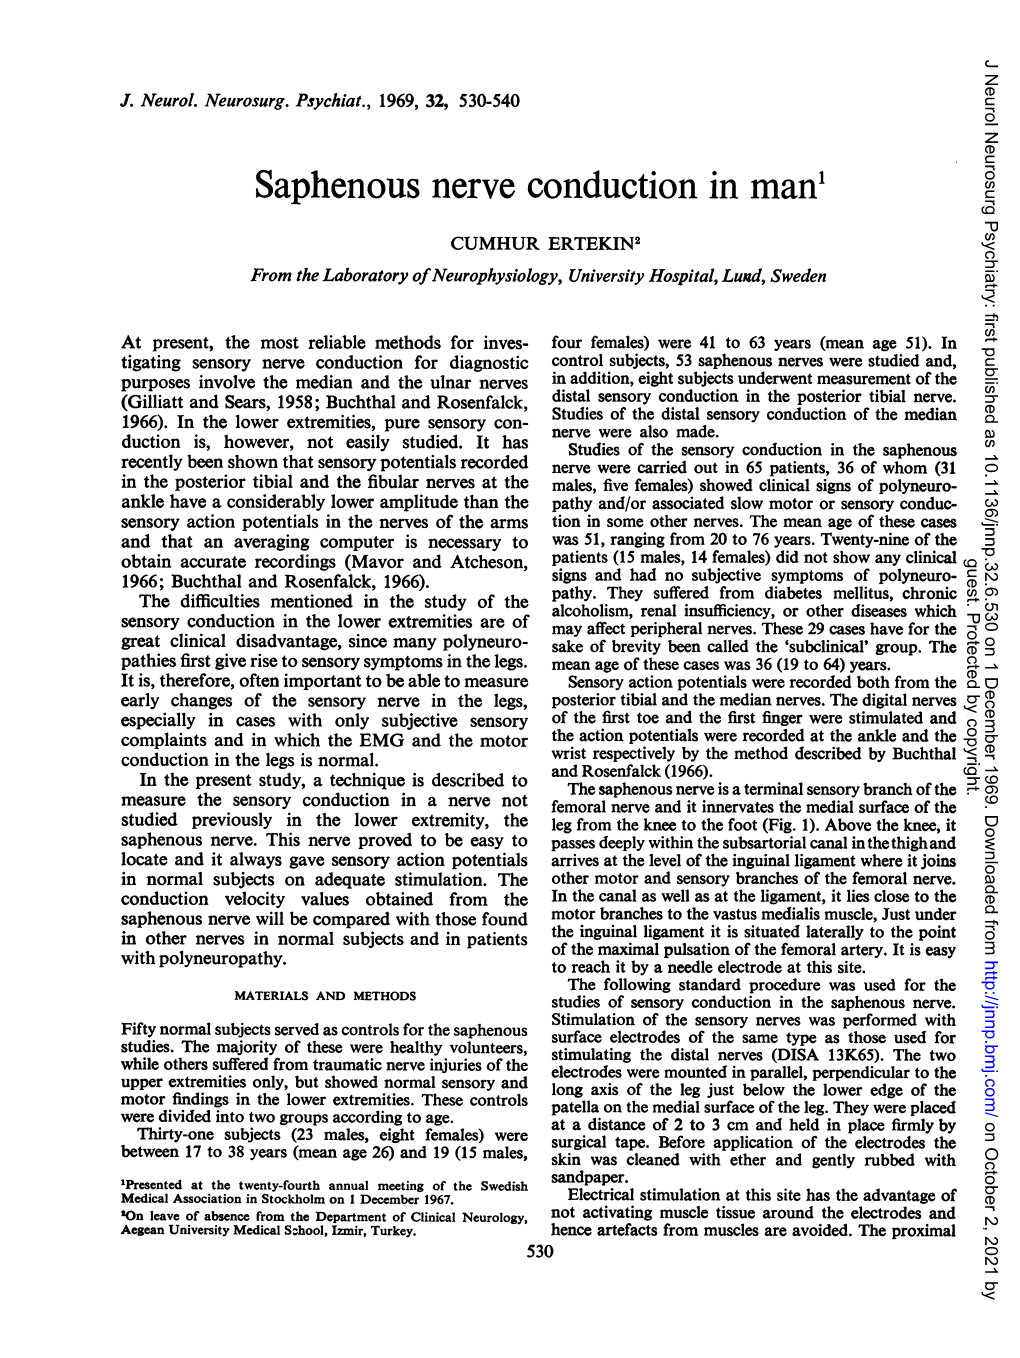 Saphenous Nerve Conduction in Man1